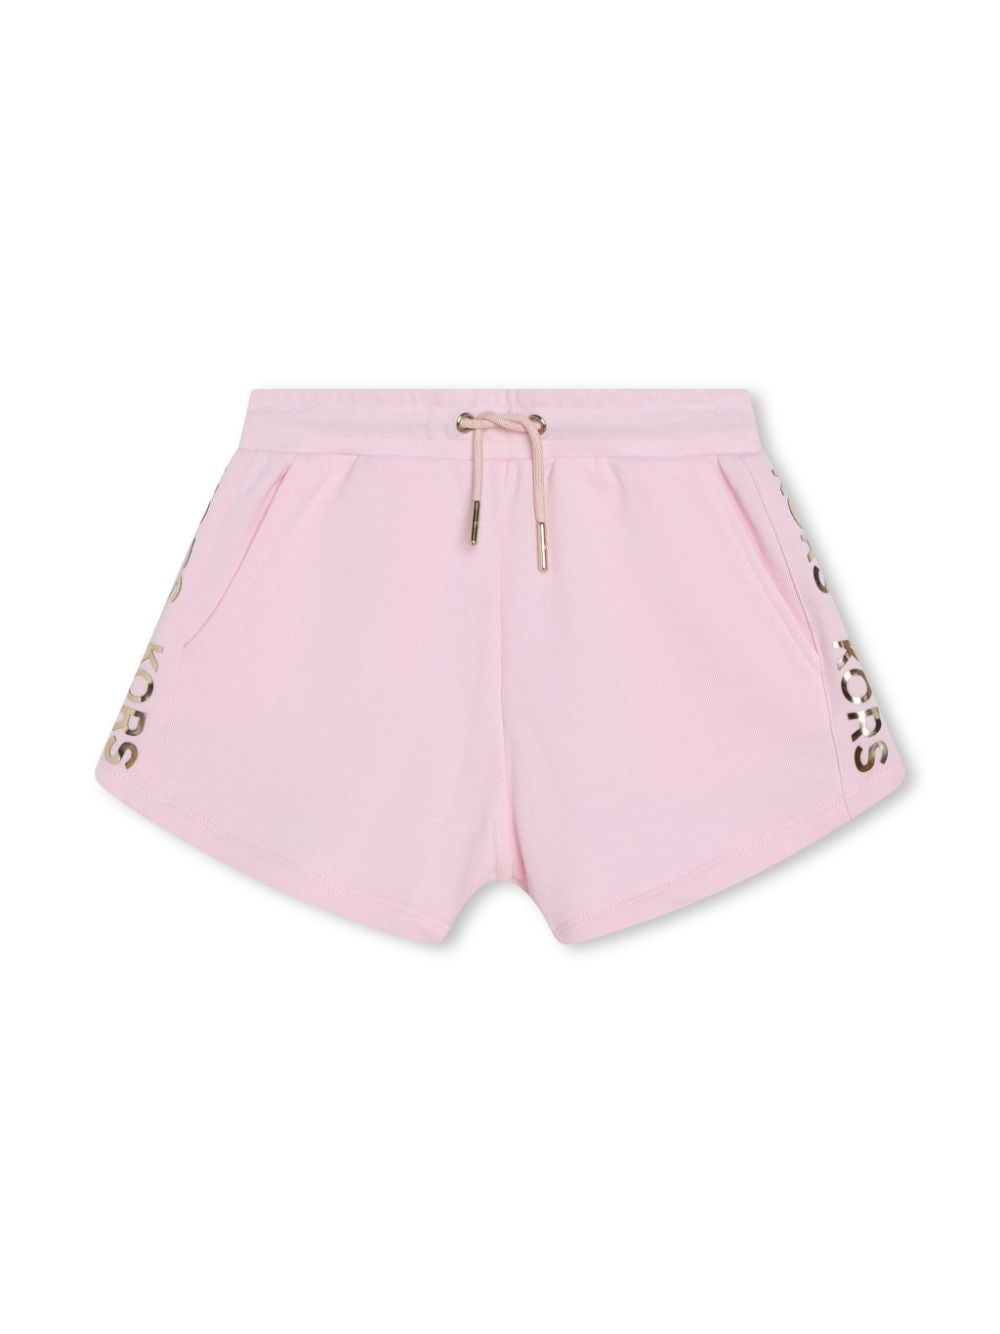 Pink Bermuda shorts for girls with logo